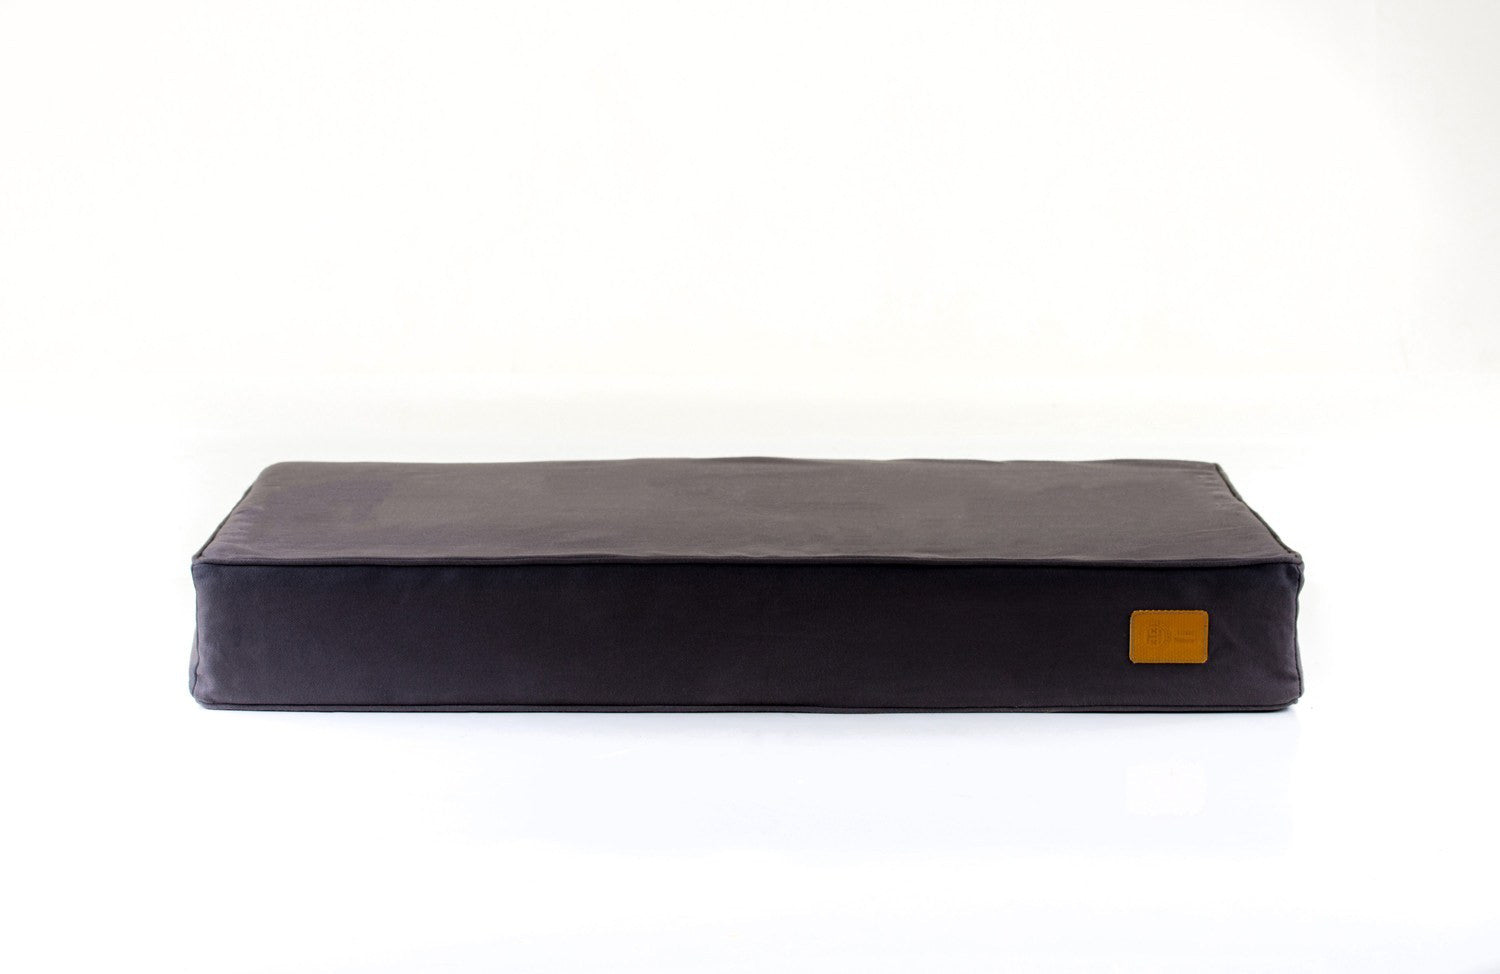 Charcoal bull denim cotton Classic natural dog bed made in Britain.